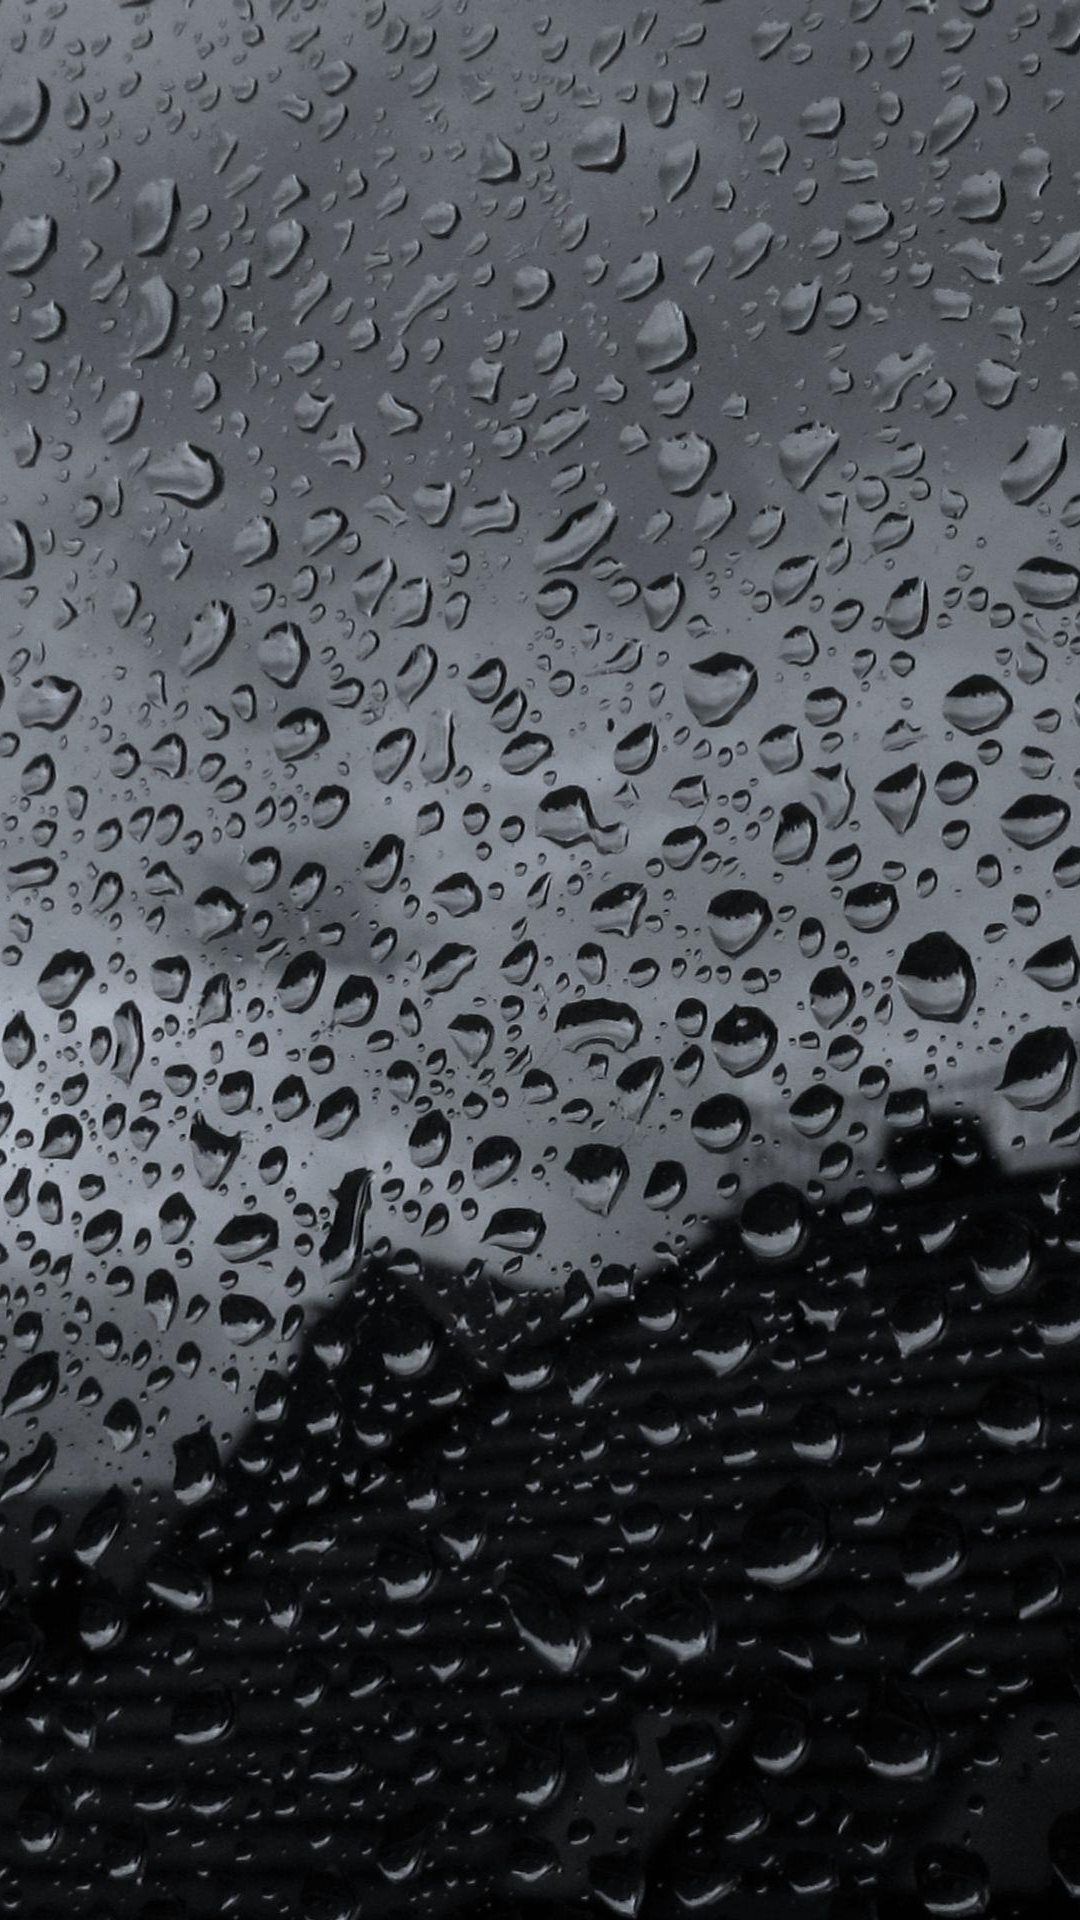 Drops On Glass Black And White Android Wallpaper Free Wallpaper Black And White